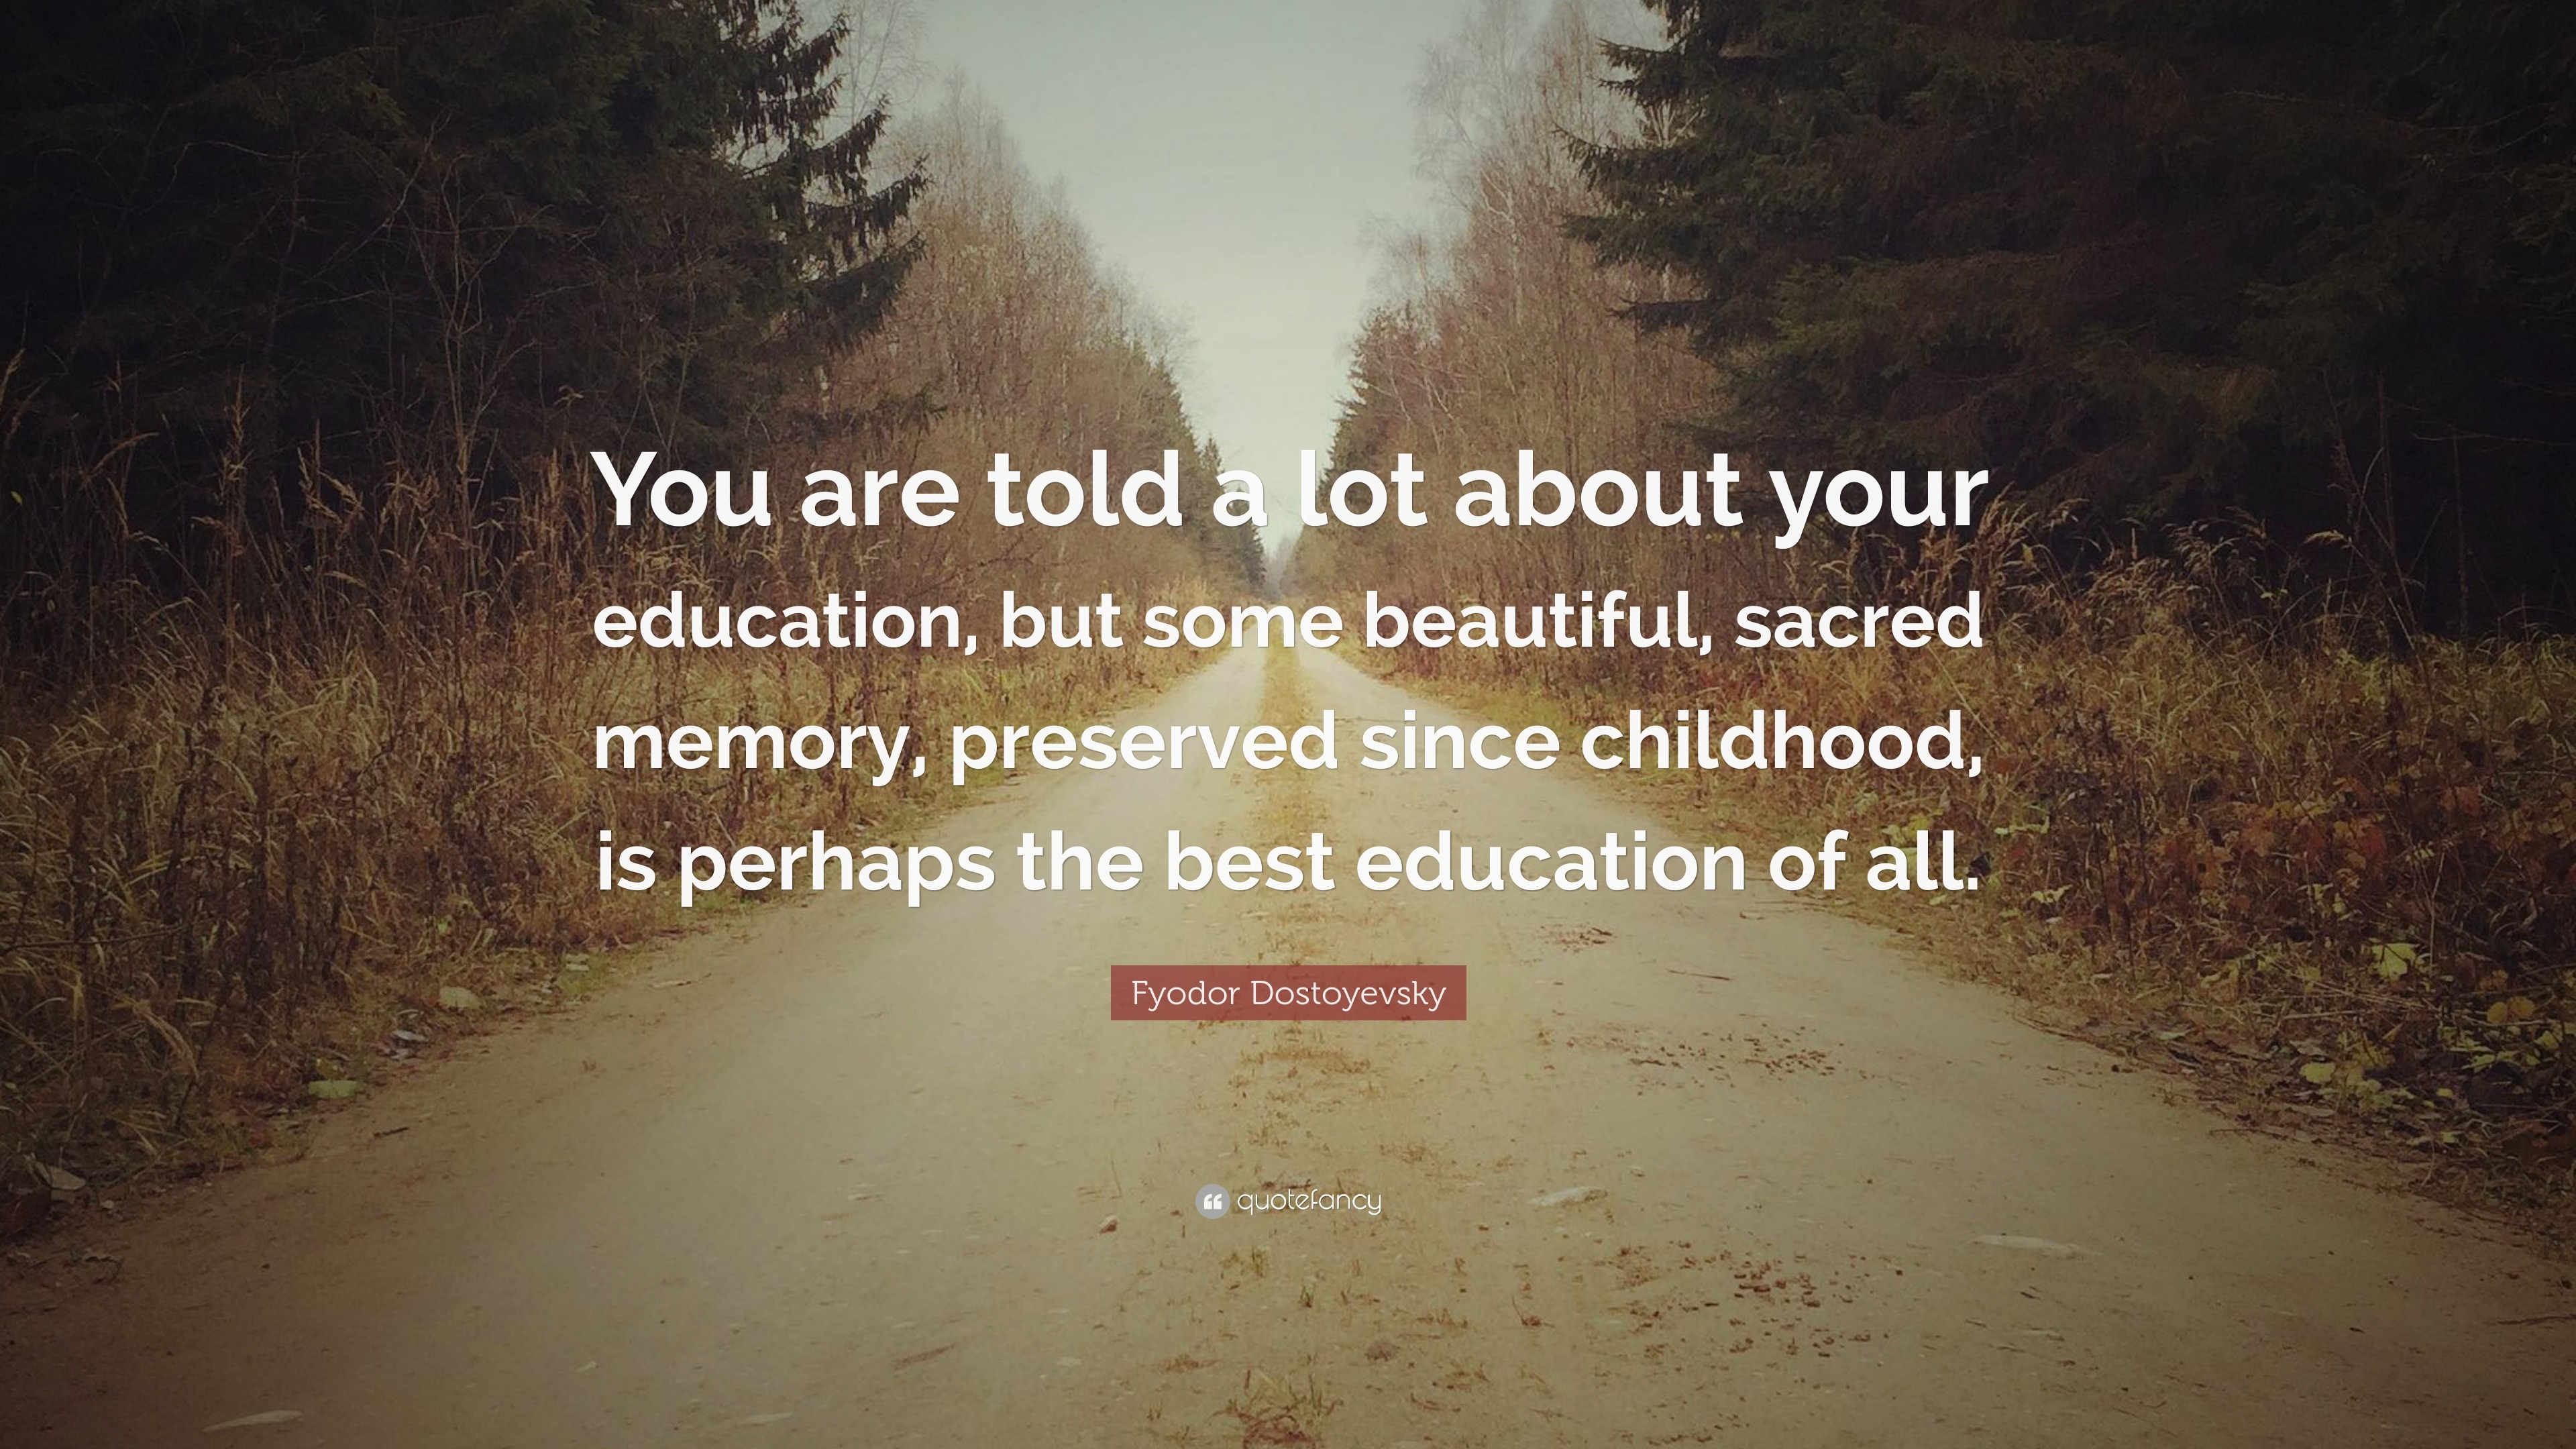 Fyodor Dostoyevsky Quote: “You are told a lot about your education, but ...